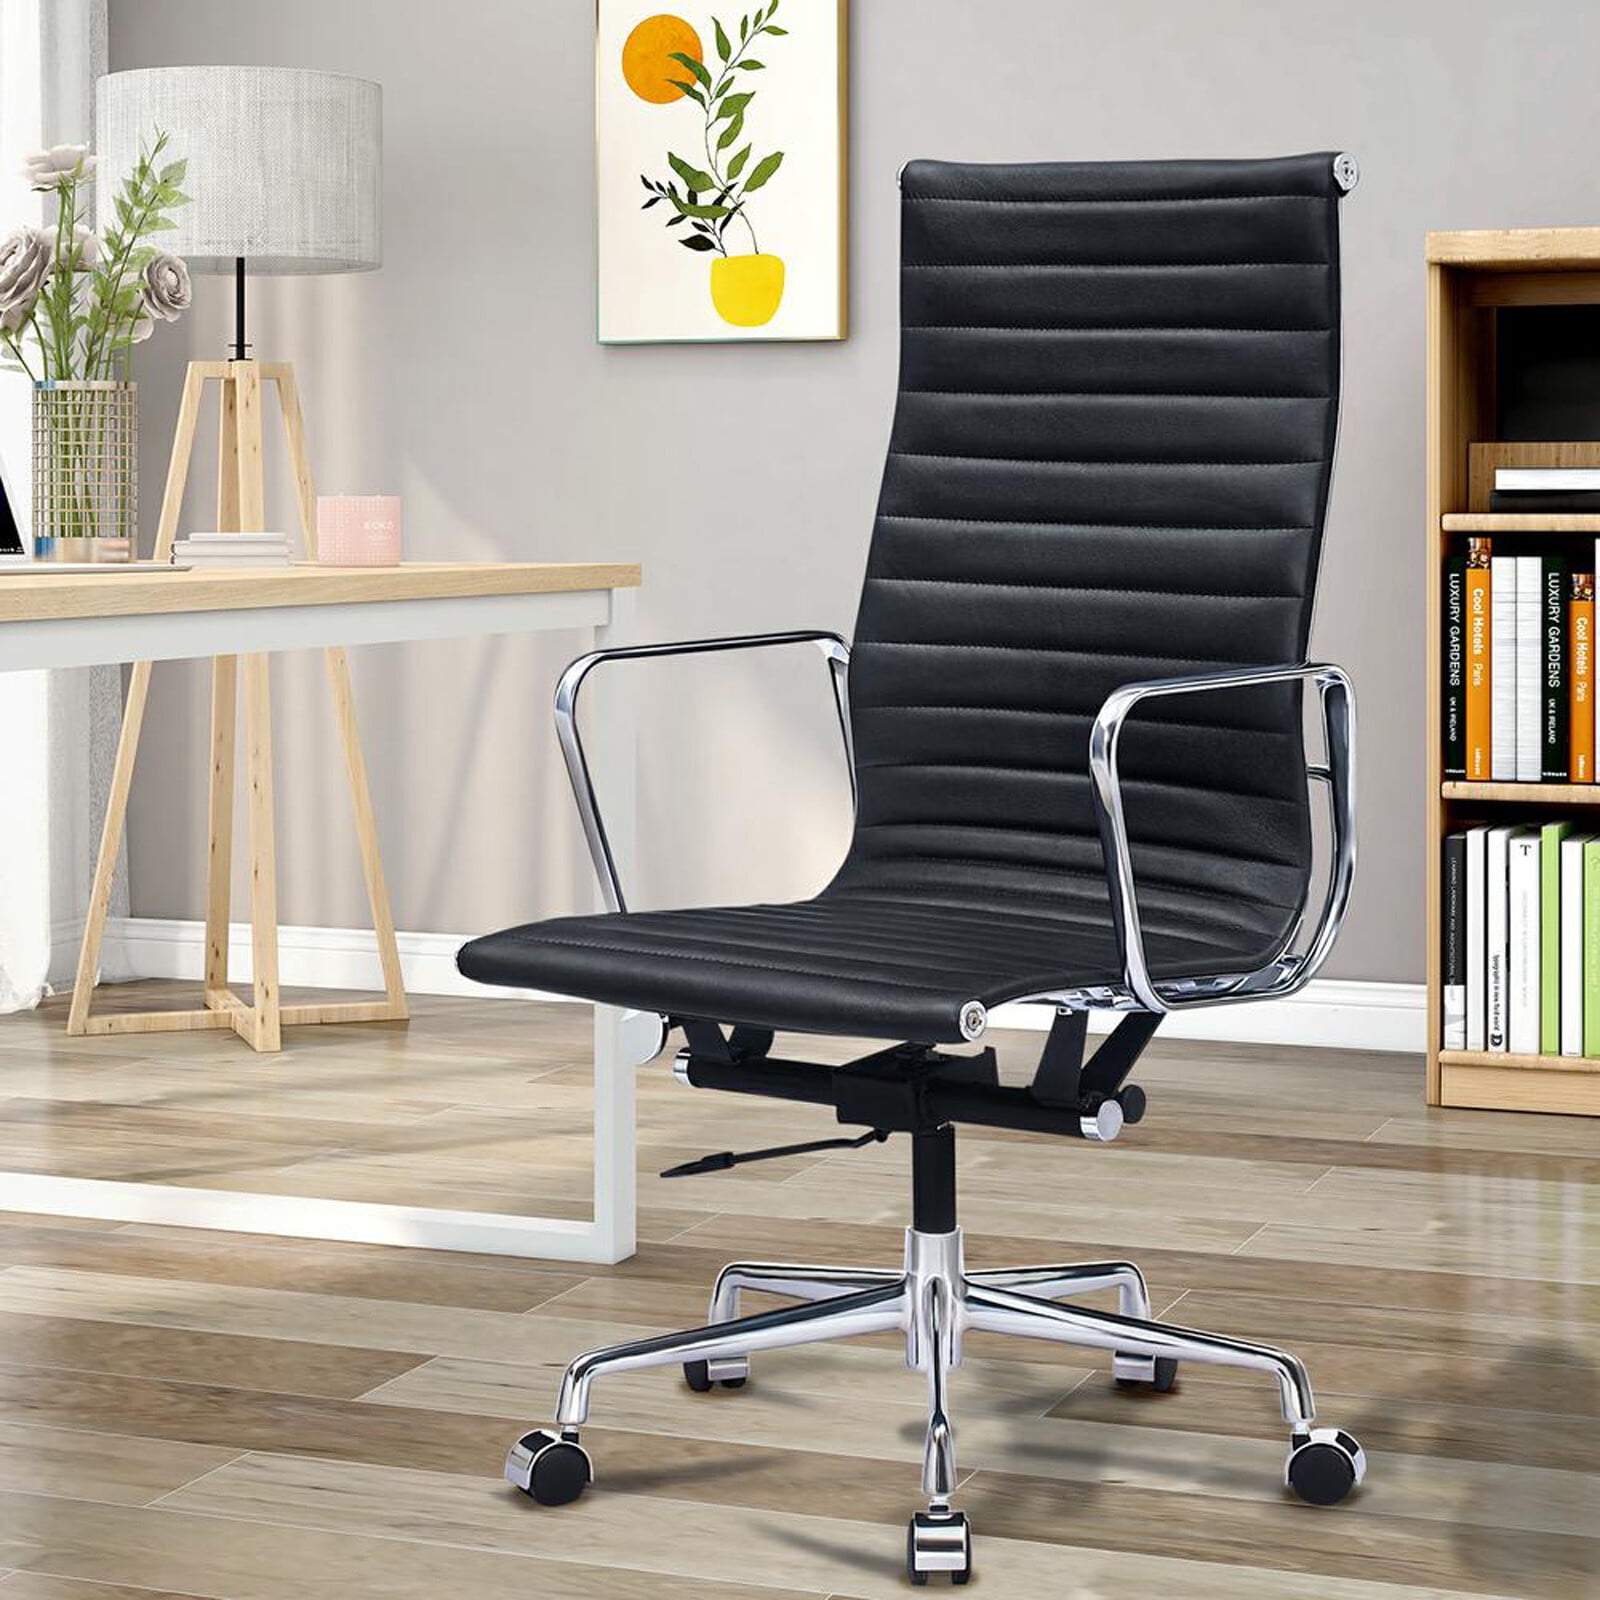 Executive Bonded Leather Computer Desk Sw Details about   Free Shipping High Back Office Chair 